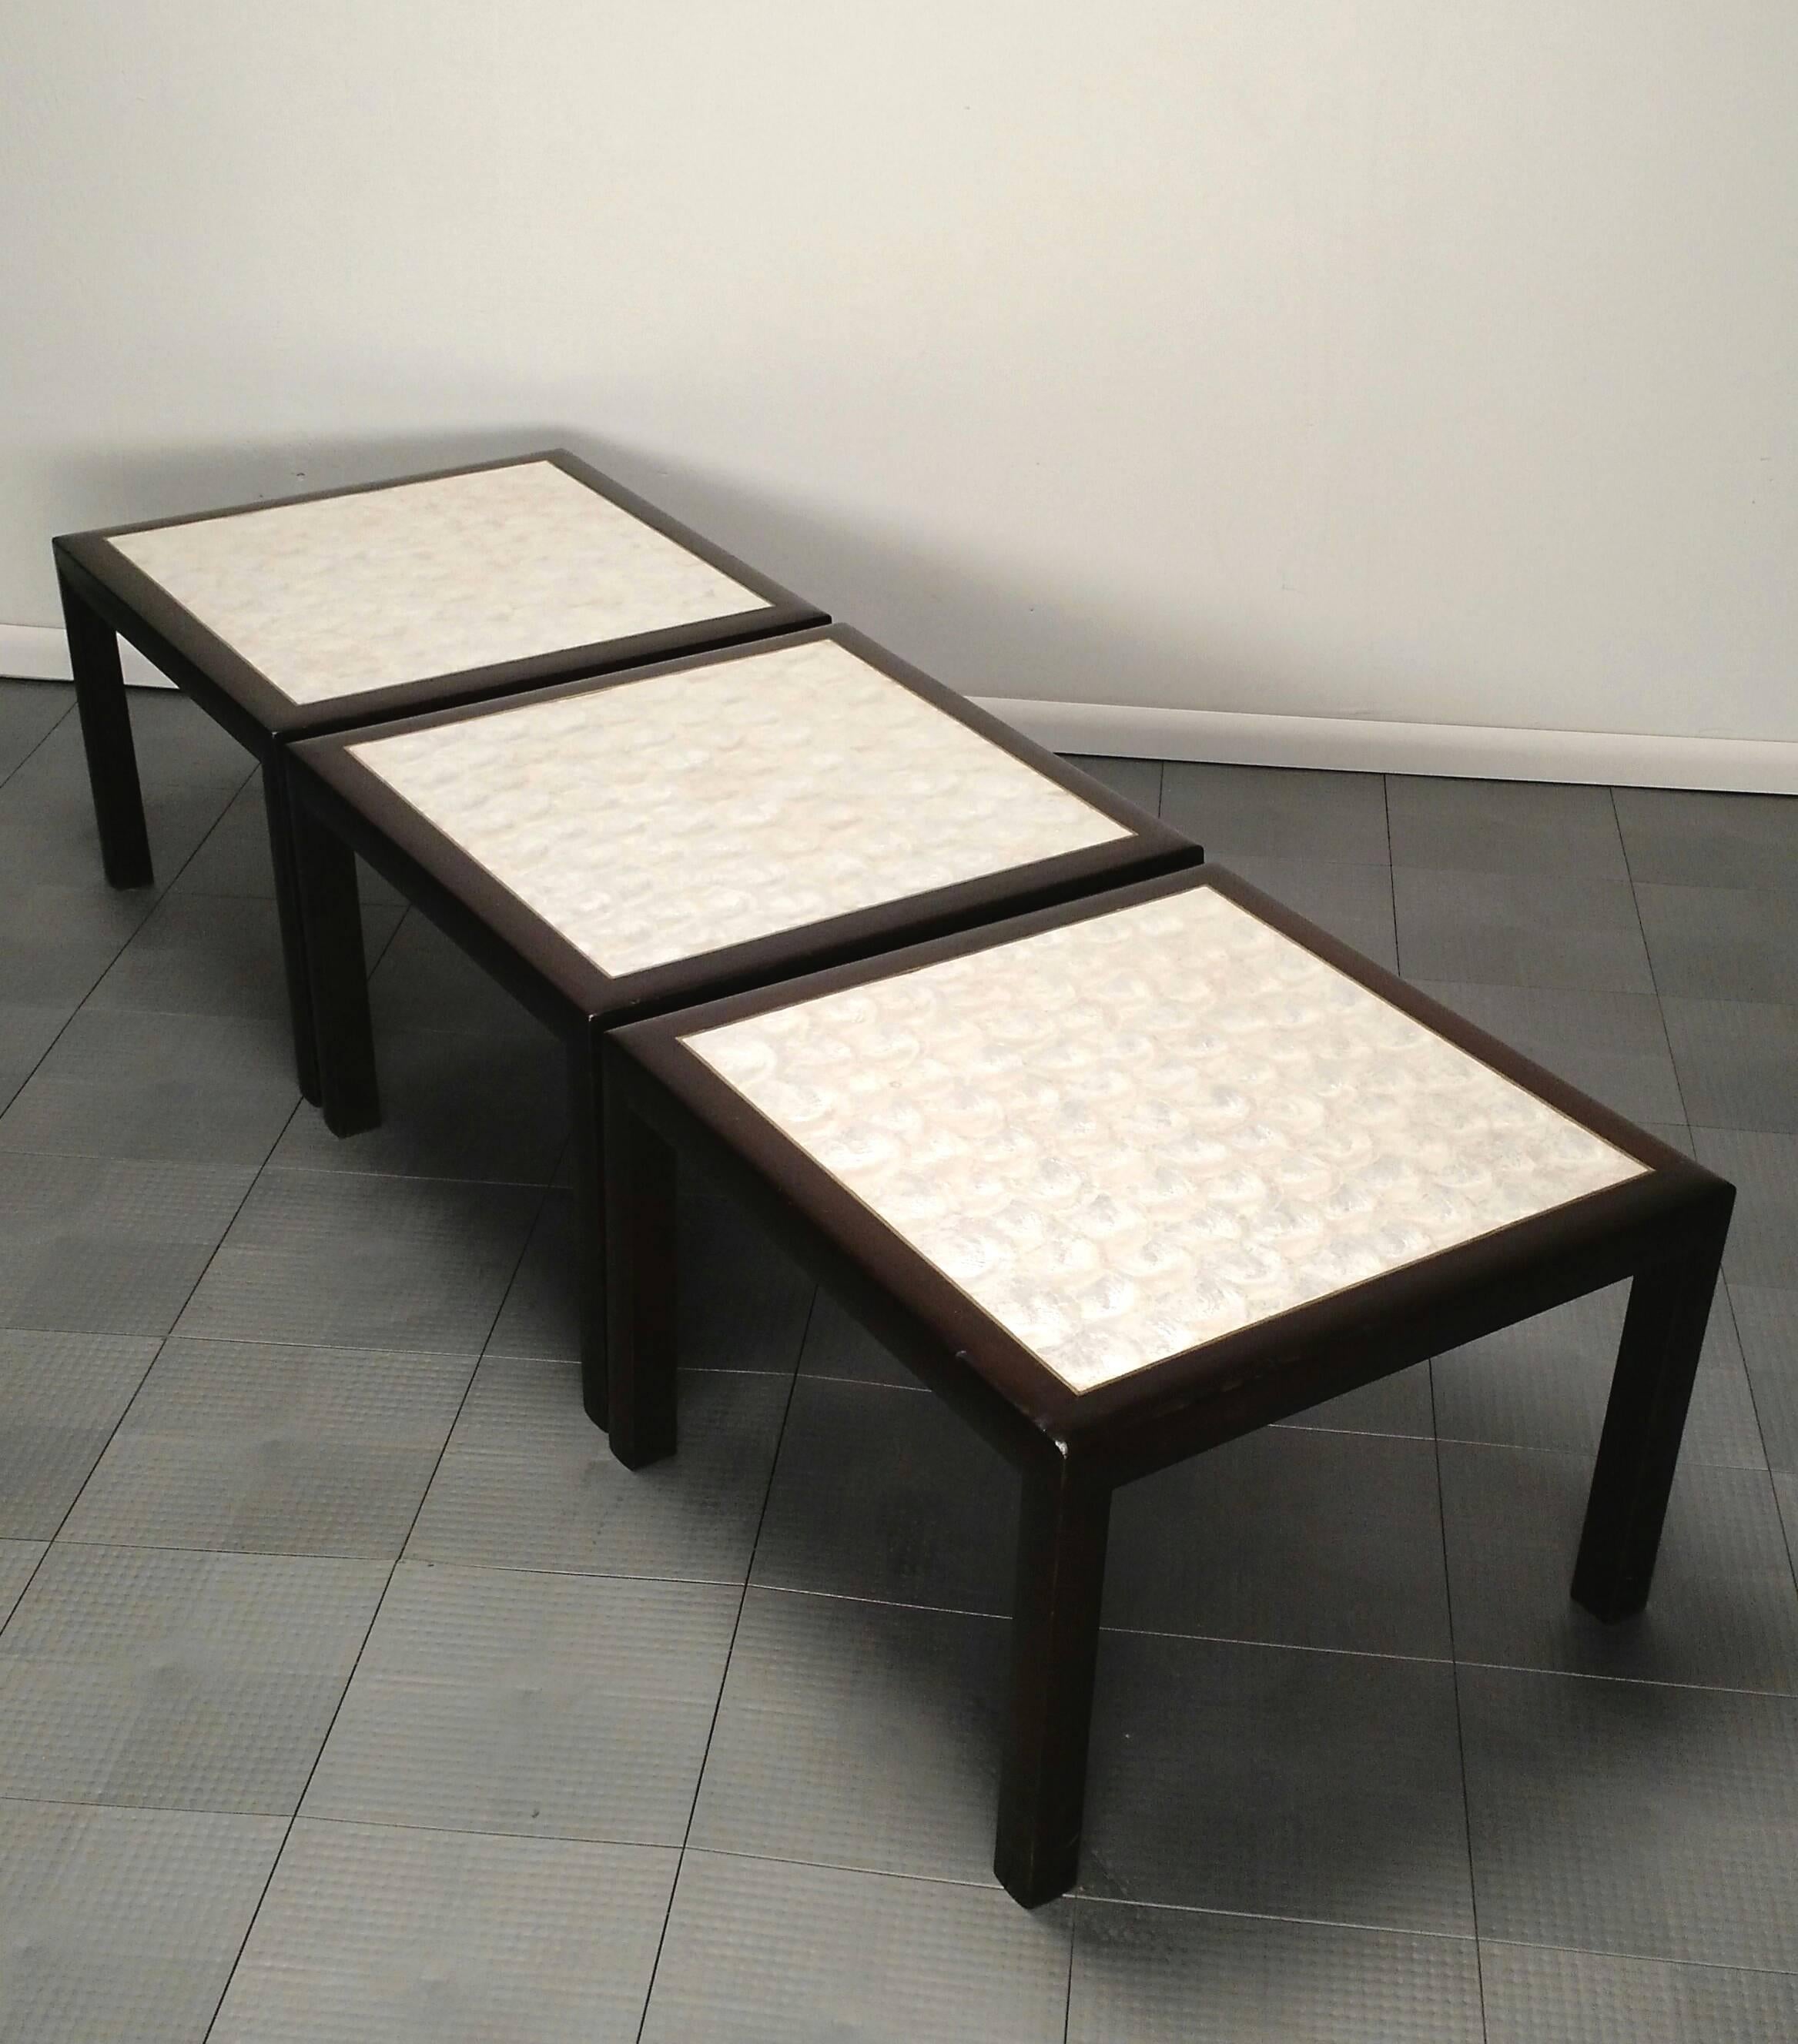 Set of three lacquered mahogany parsons tables with polished brass top trim and pearly Capiz shell inlay.
Can be used together as a long cocktail table or individually.
Extraordinary custom crafted tables, circa 1960s.
These are in exceptional